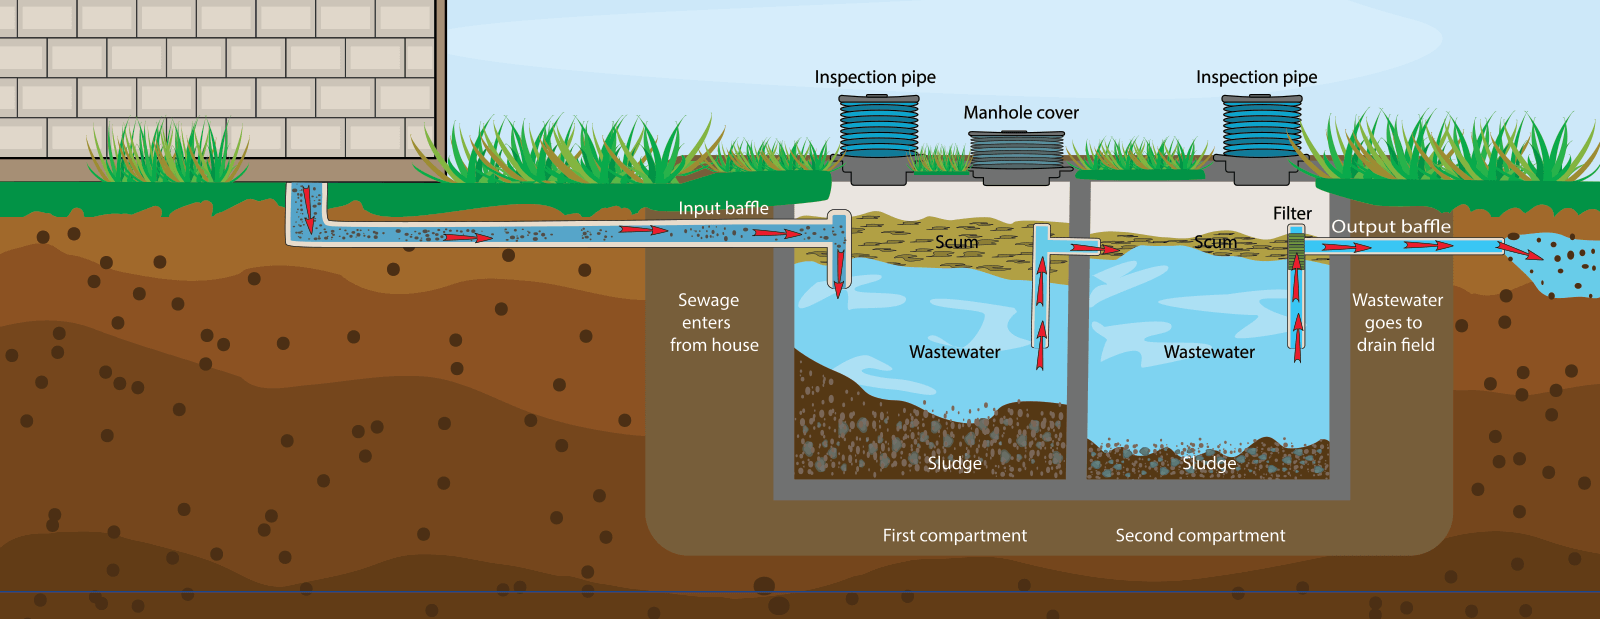 Septic System Guide